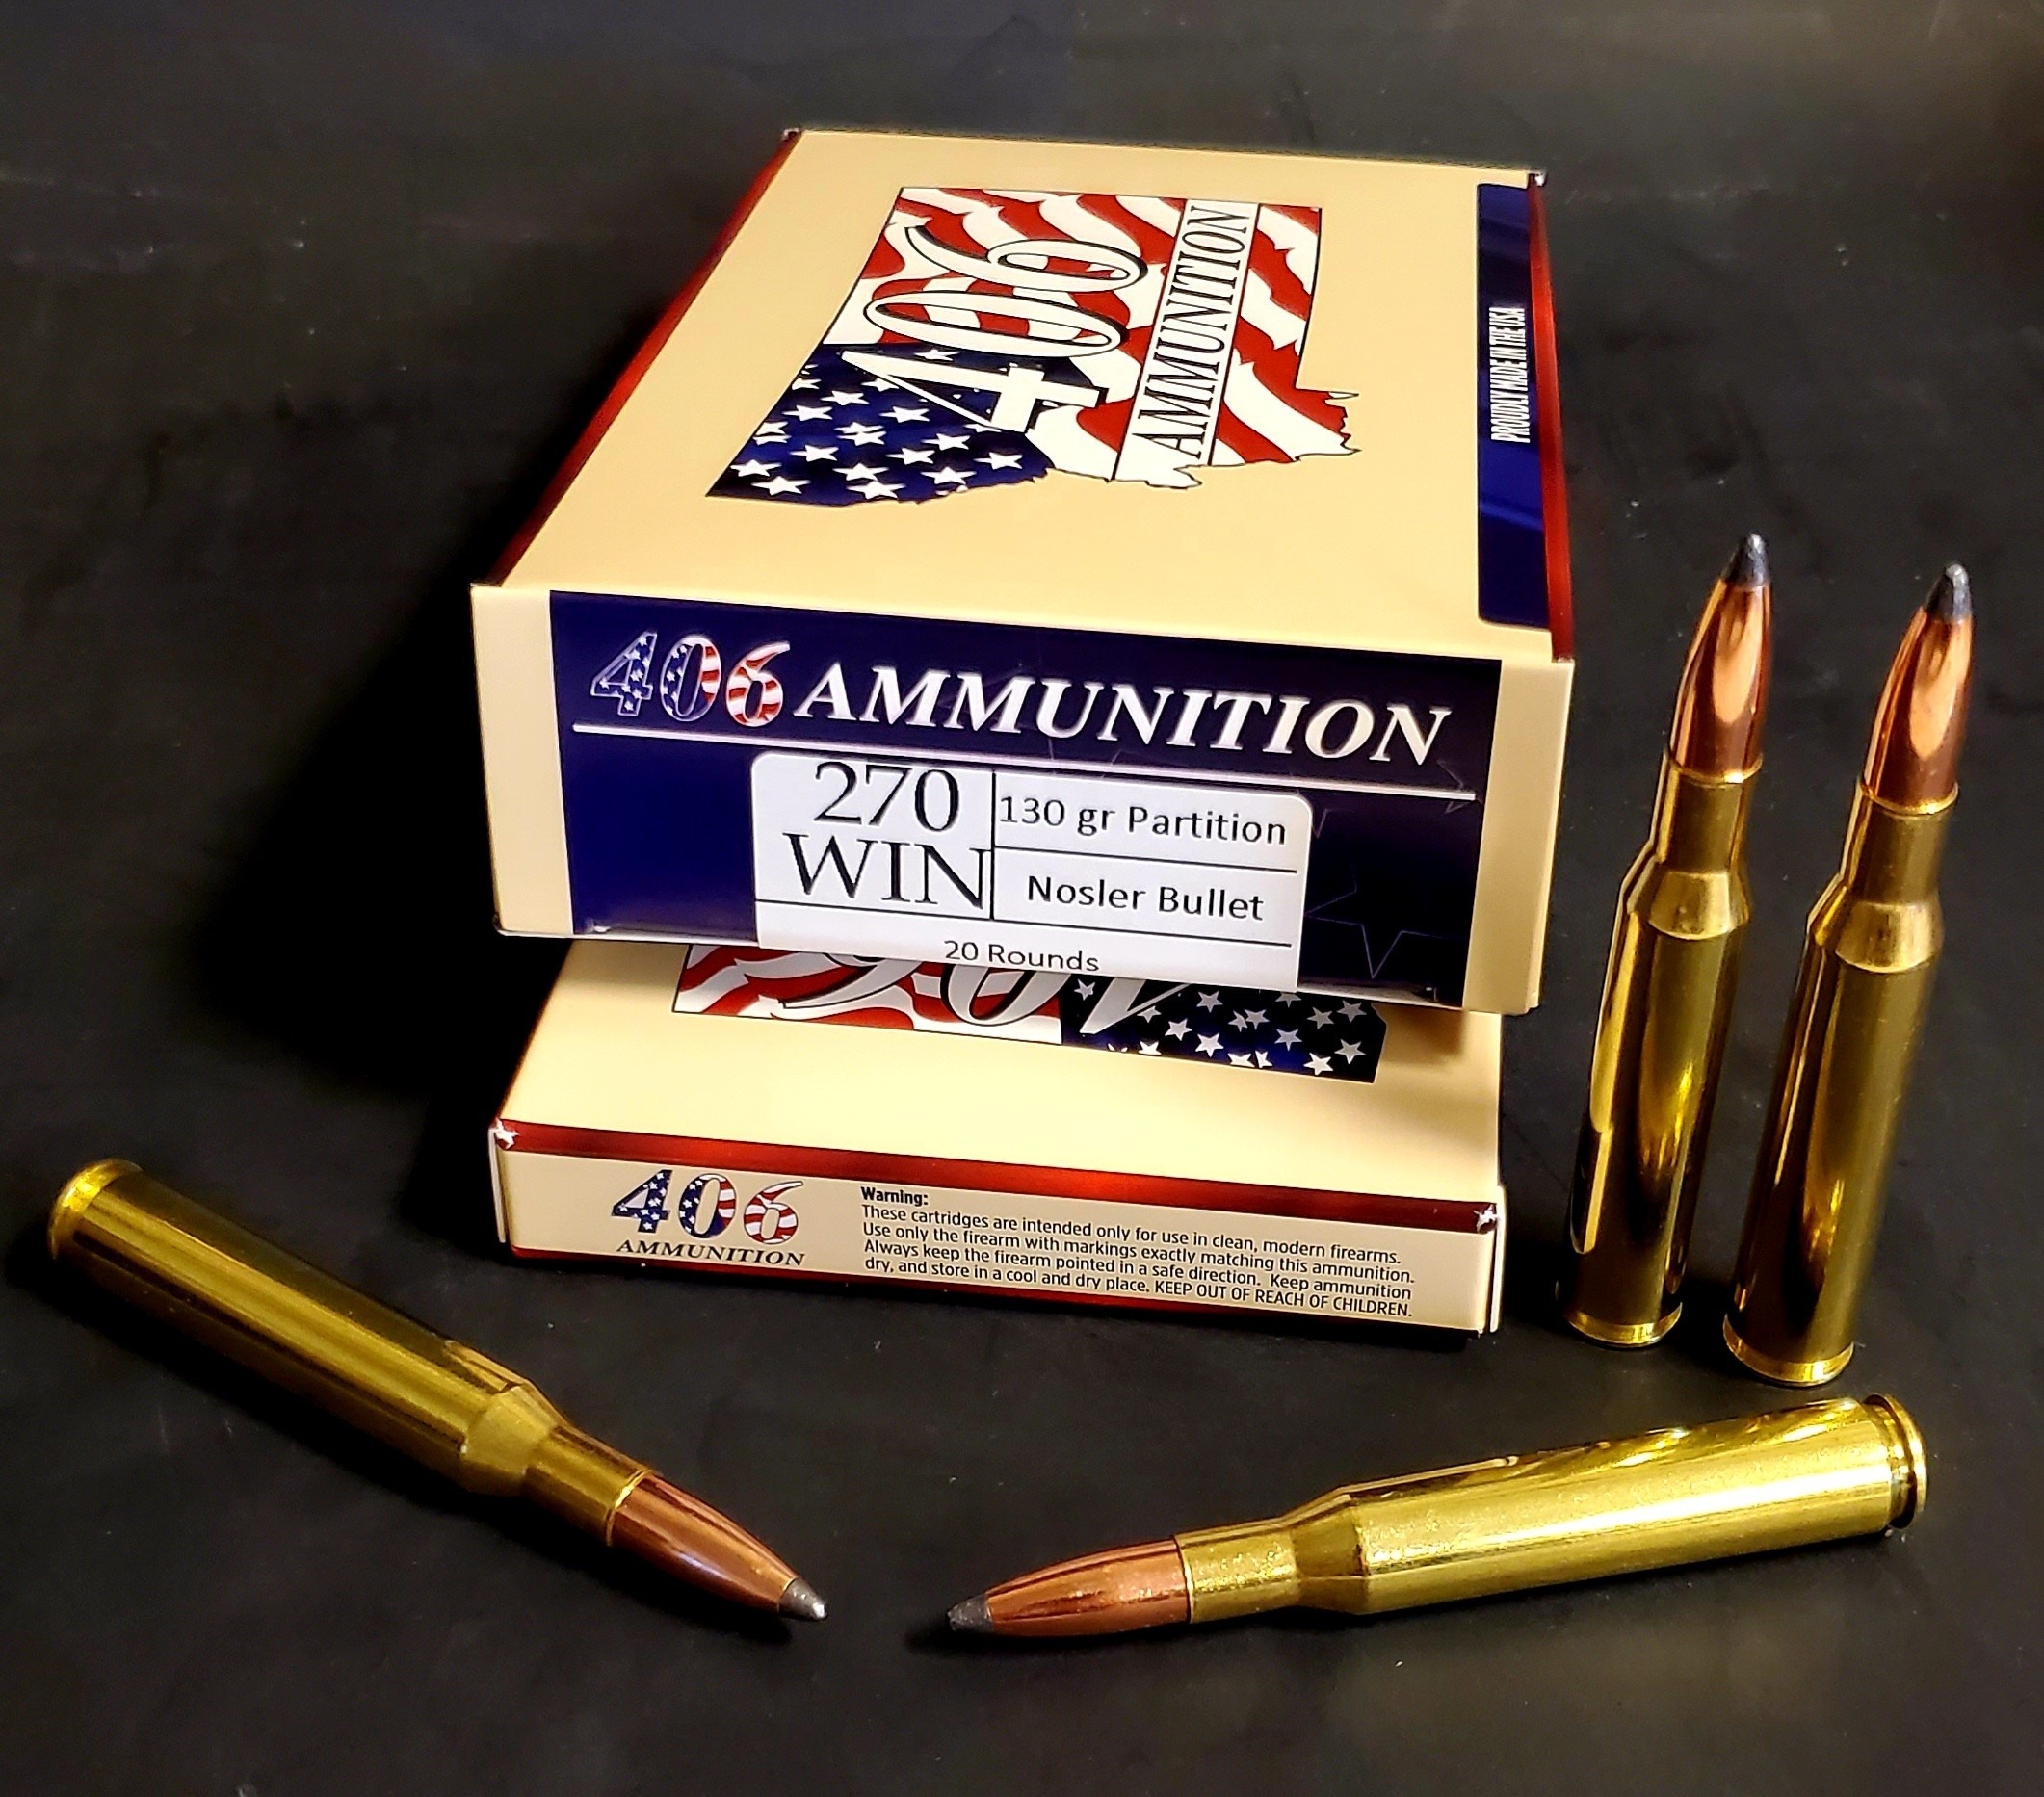 270 Win 130gr Nosler Partition The Ammo Store Online Shop The